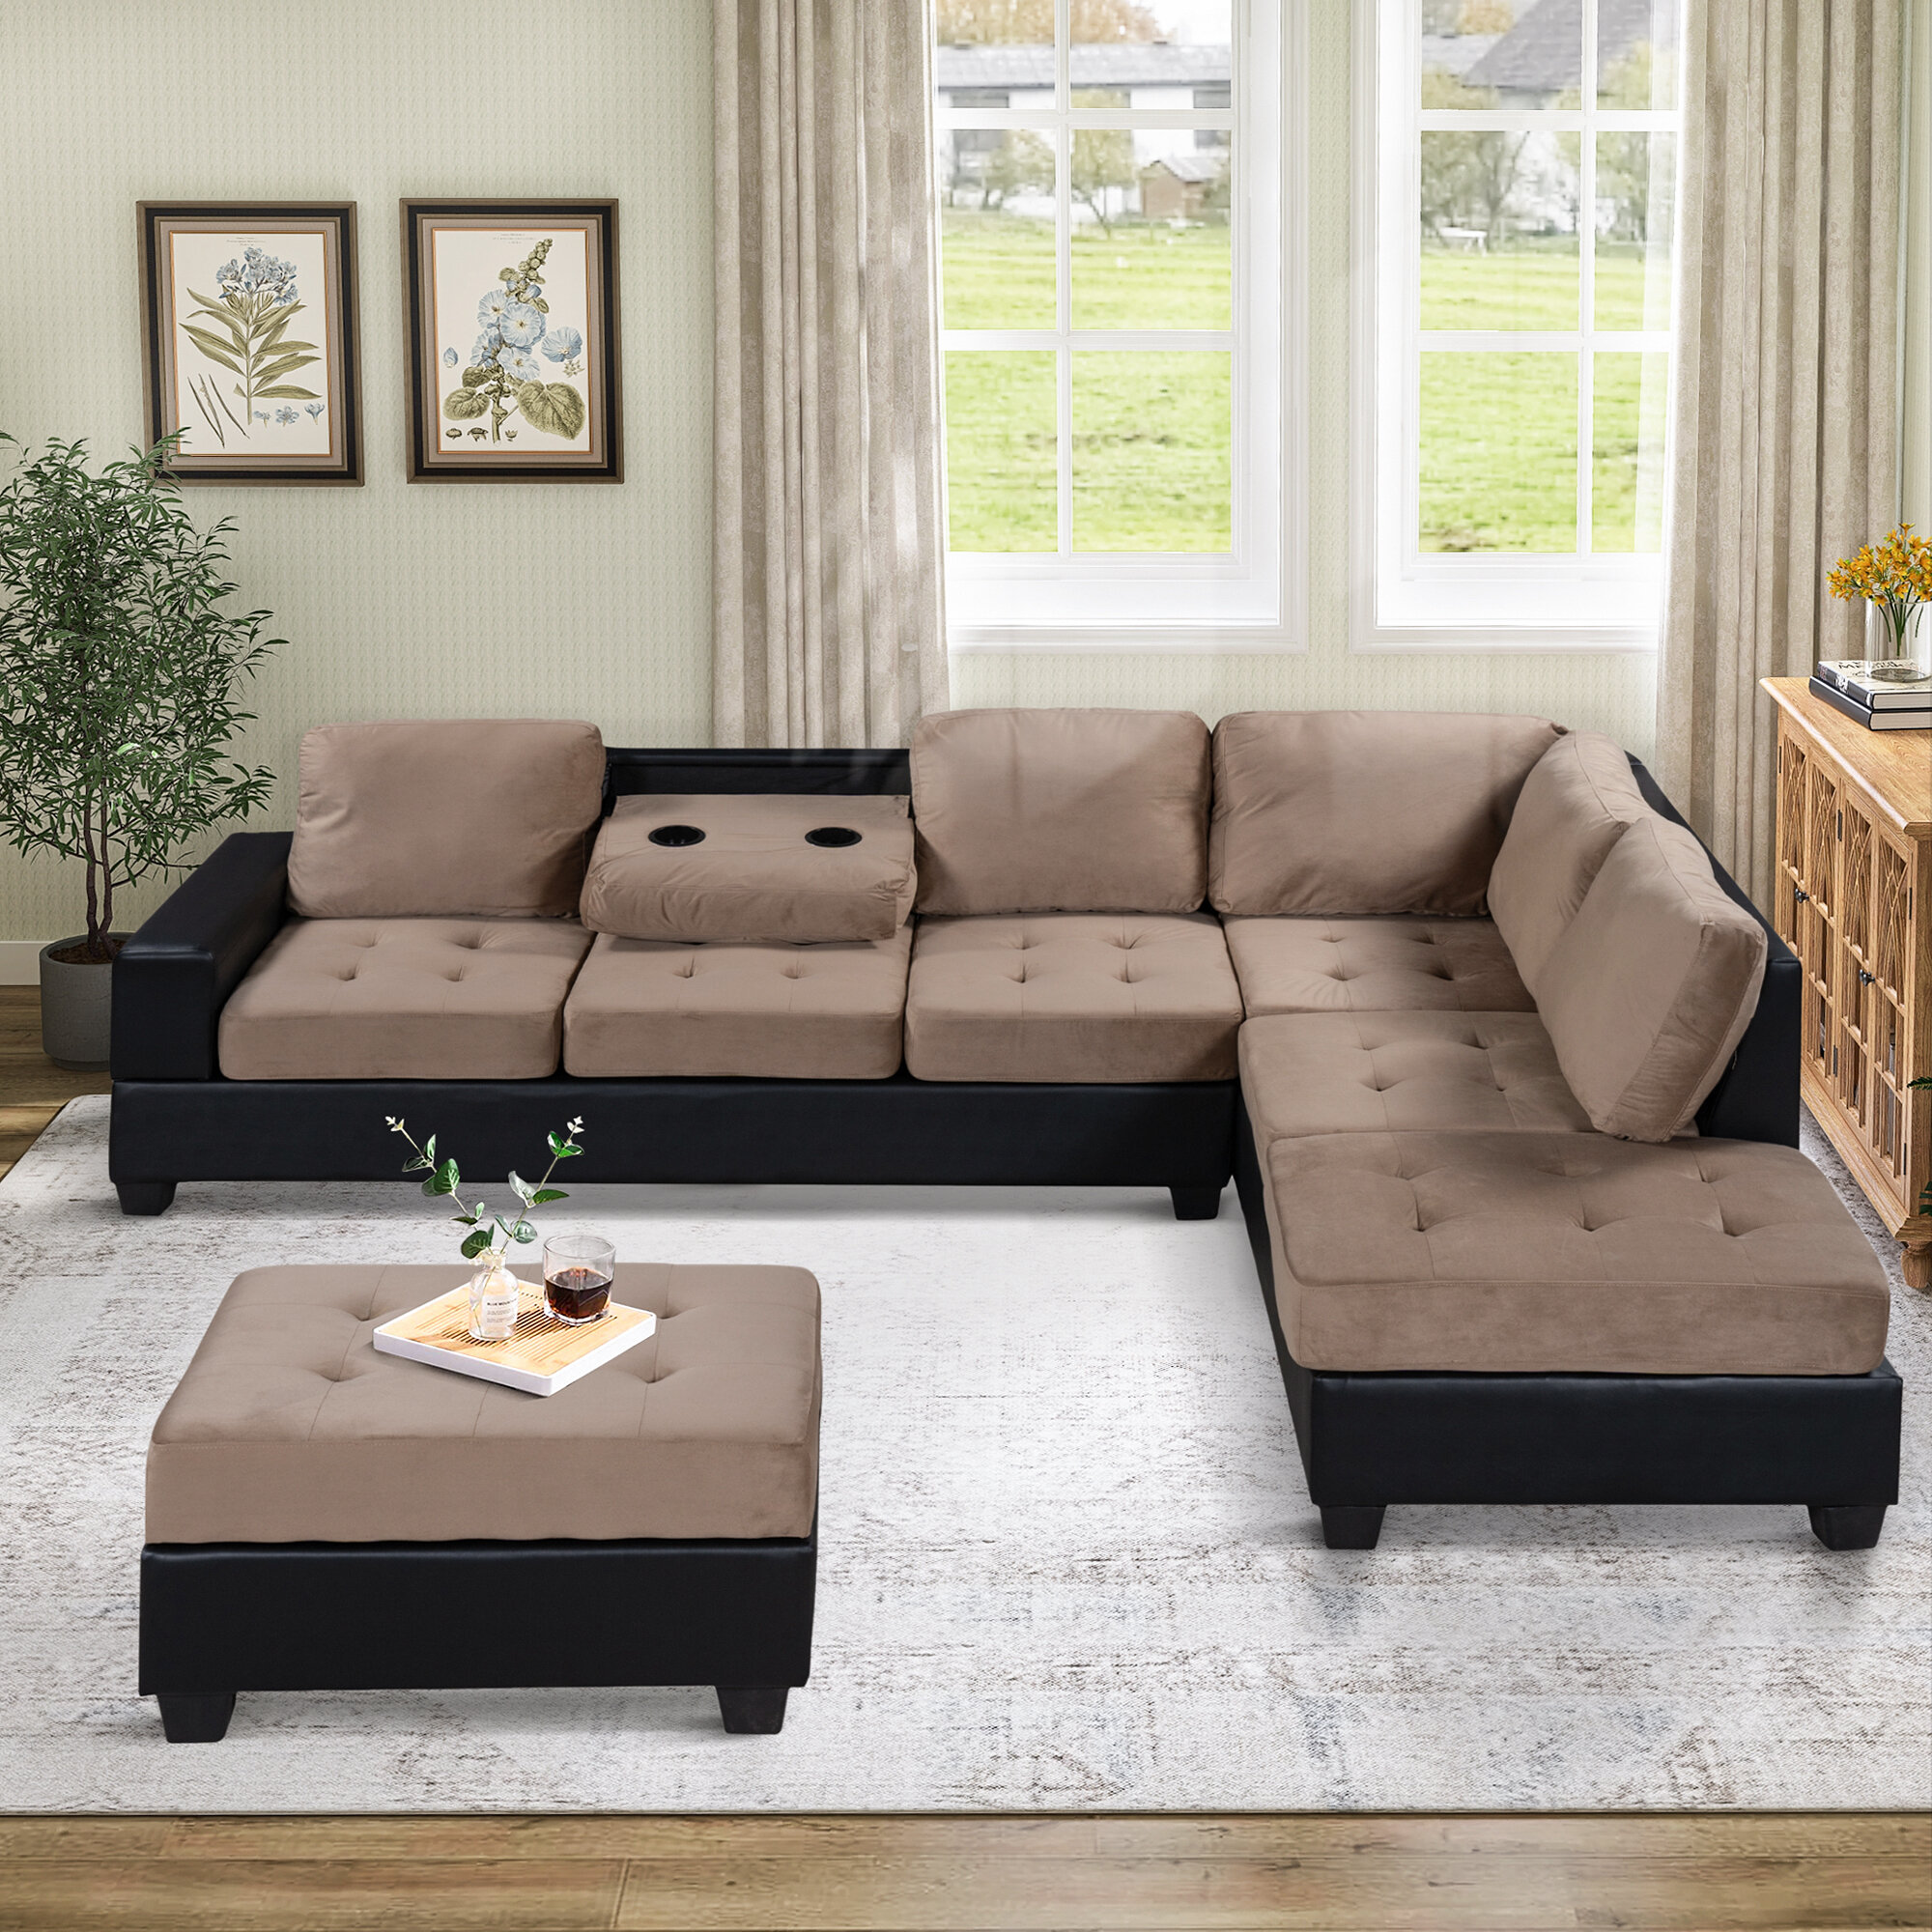 Convertible Couch with Storage Ottoman Sectional Sofa Set Modern Sofa for Living Room 5-Seat Sofa with Ottoman Brown